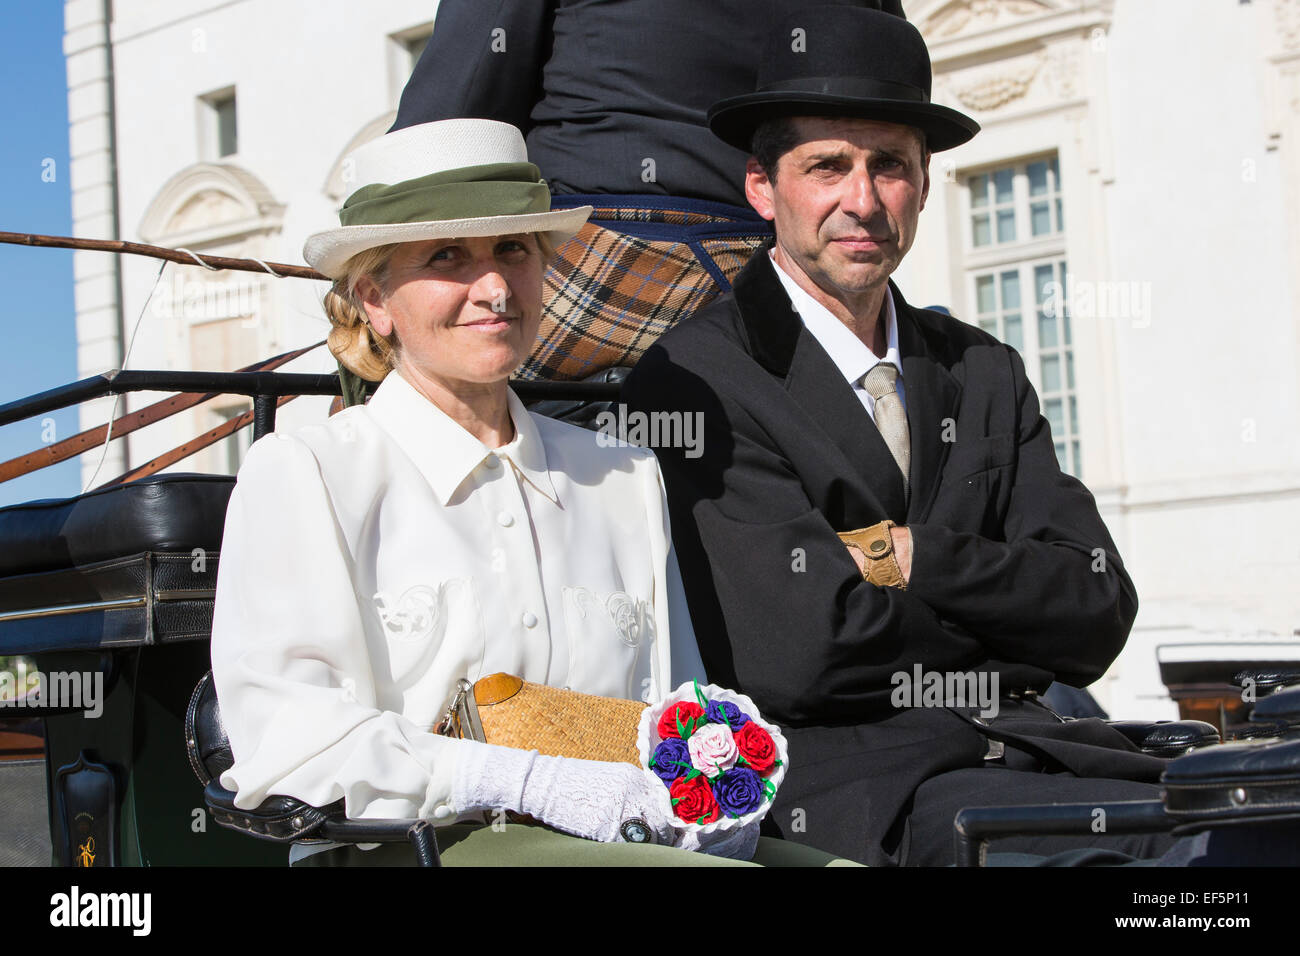 International competition for traditional carriages "La Venaria Reale",competitors wearing the dress code,Italy Stock Photo